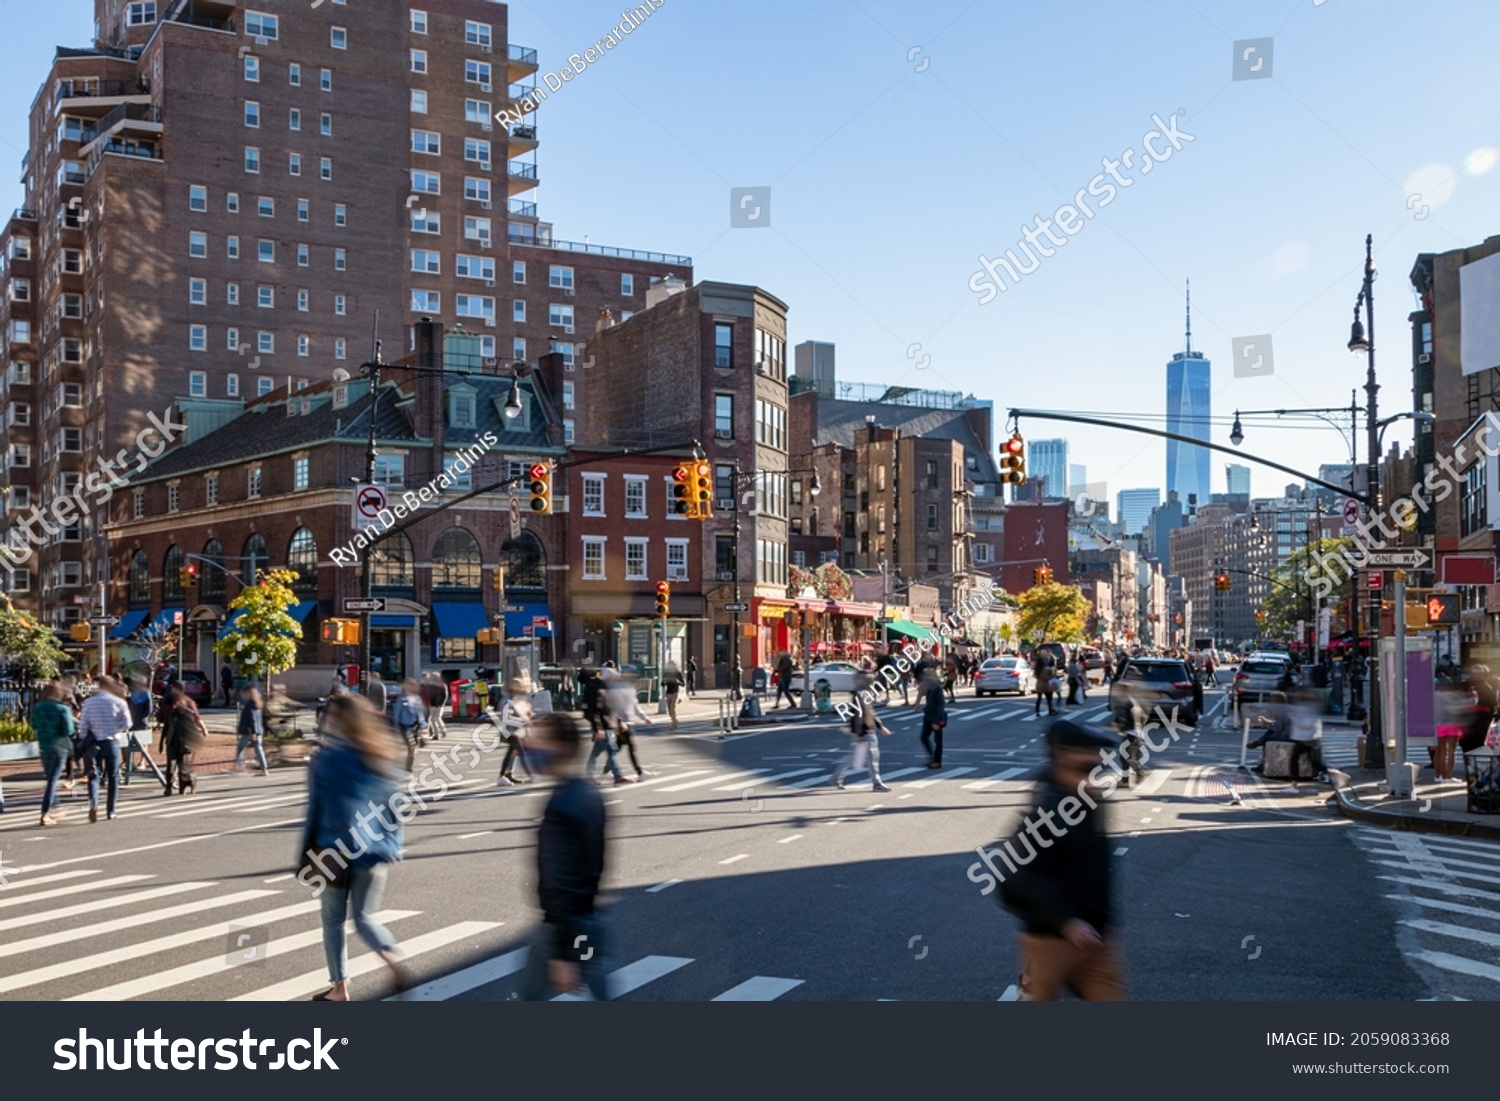 Crowds of people walking across a busy intersection on 7th Avenue in the West Village neighborhood of New York City NYC #2059083368